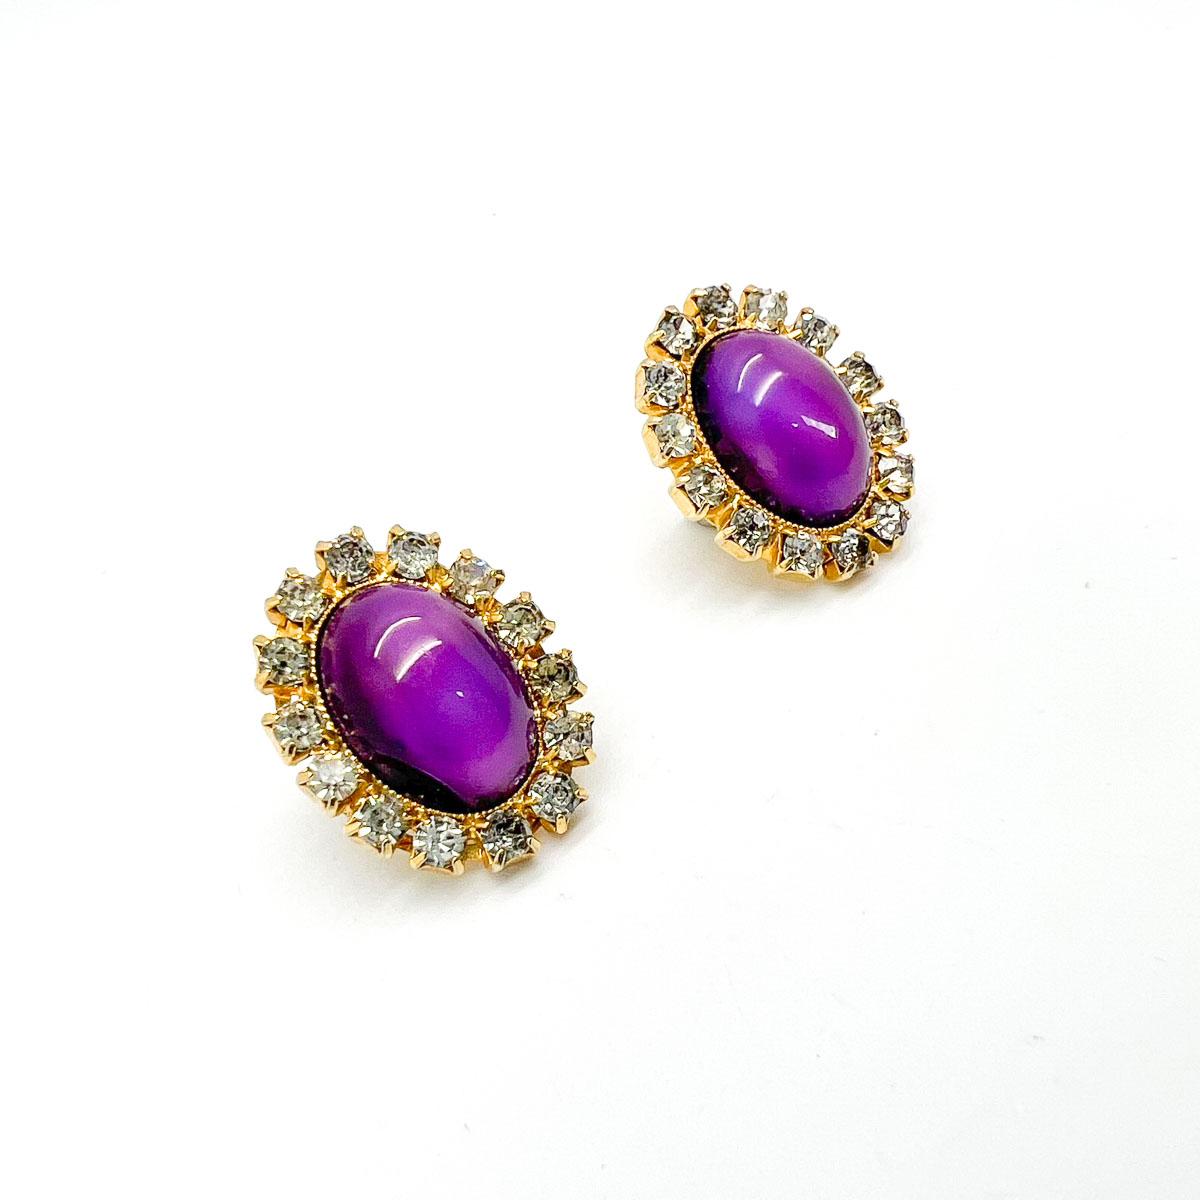 Vintage Amethyst Glass Cabochon Earrings 1980s In Good Condition For Sale In Wilmslow, GB